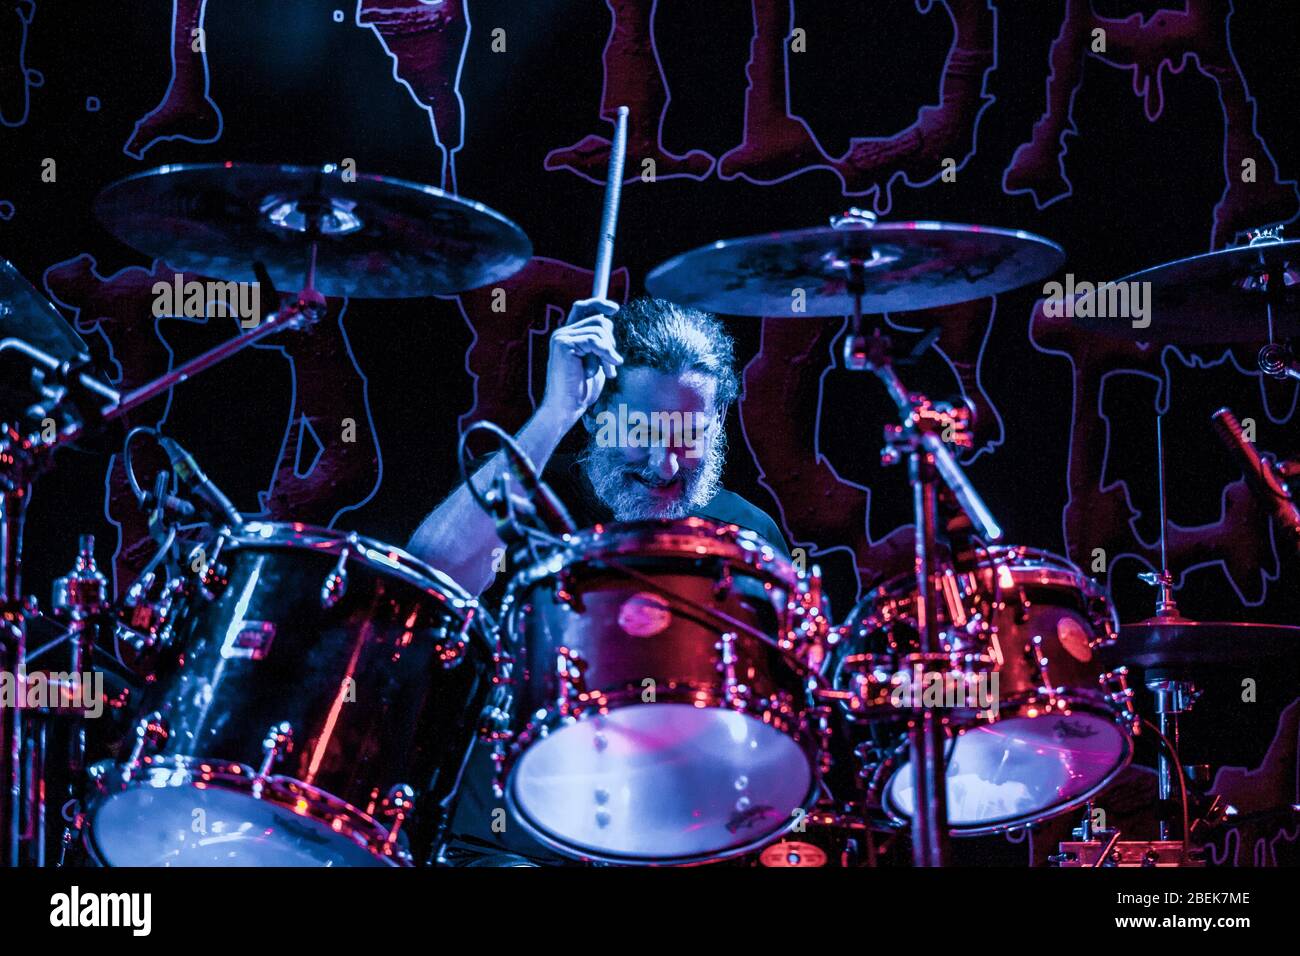 Kolding, Denmark. 15th, February 2018. The American death metal band Cannibal Corpse performs a live concert at Godset in Kolding. Here drummer Paul Mazurkiewicz is seen live on stage. (Photo credit: Gonzales Photo - Lasse Lagoni). Stock Photo